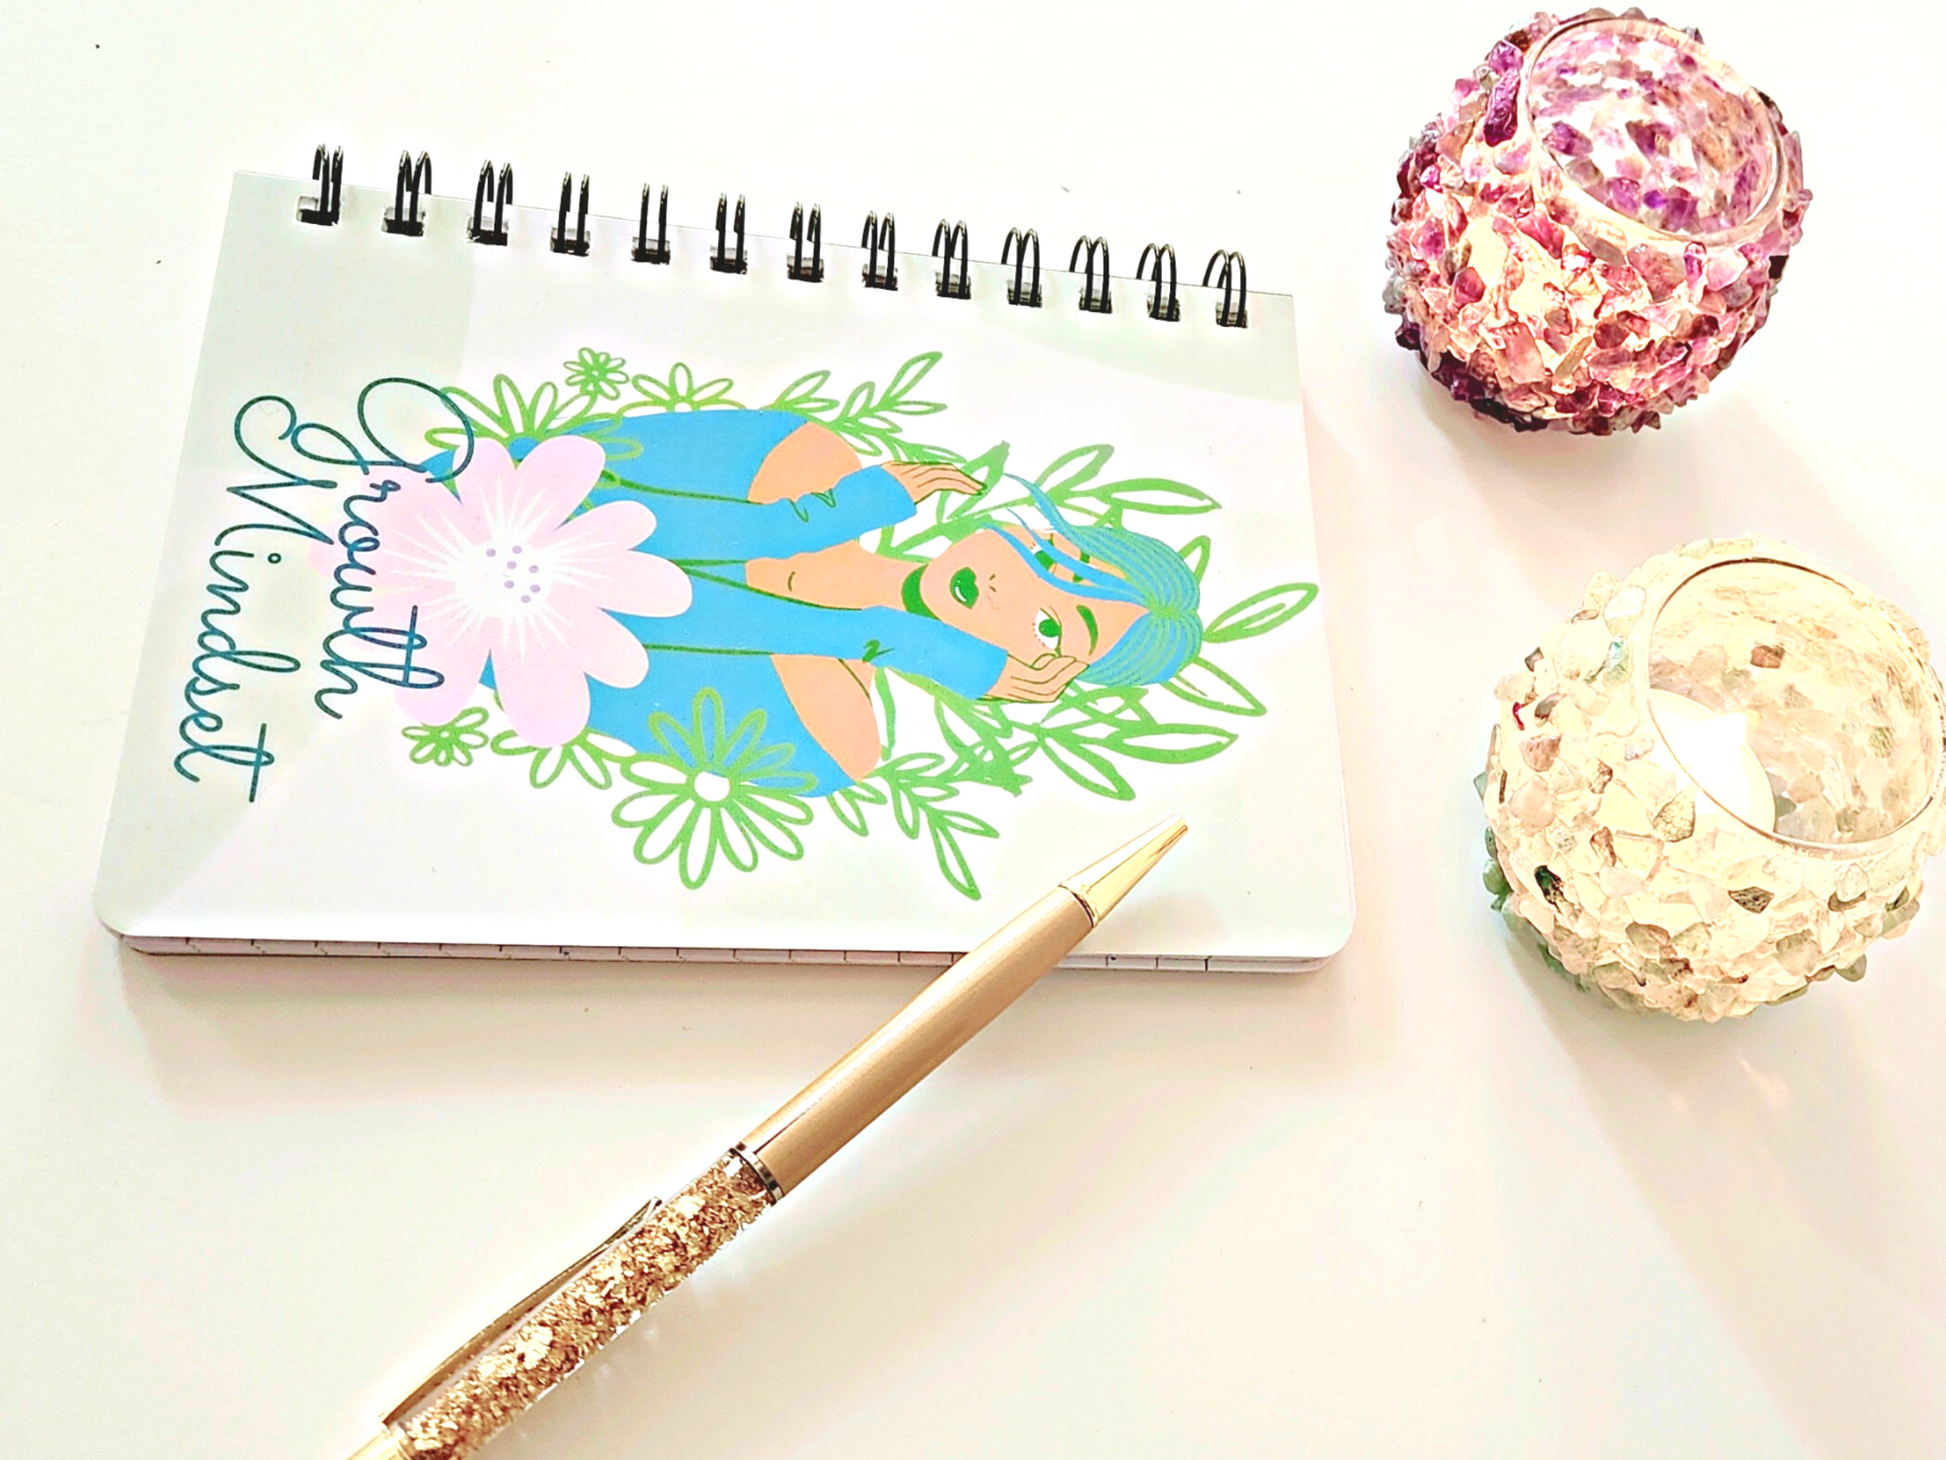 An "Growth Mindset" Inspirational Journal for Success and Self Improvement notebook for reflective journaling with a flower and a candle next to it.